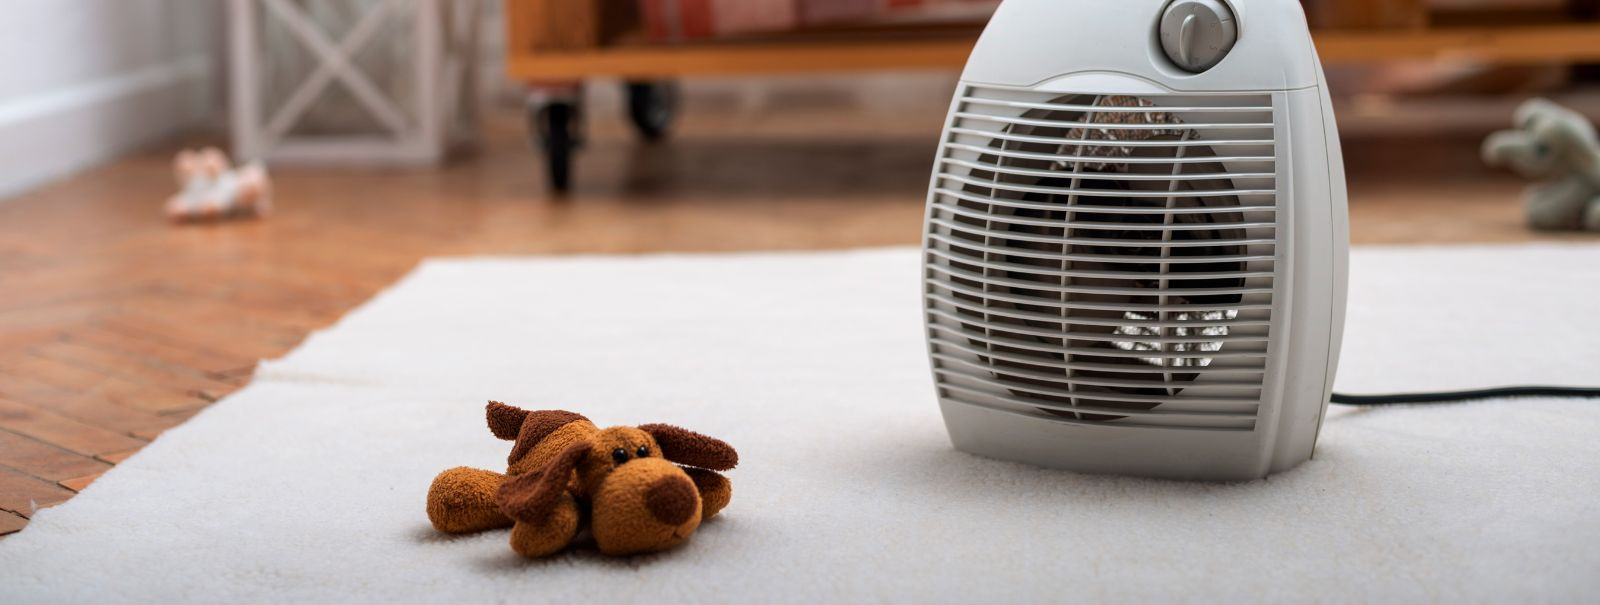 As the seasons change, the performance of your heating system becomes crucial for comfort and efficiency. Recognizing the signs that your heating system needs a